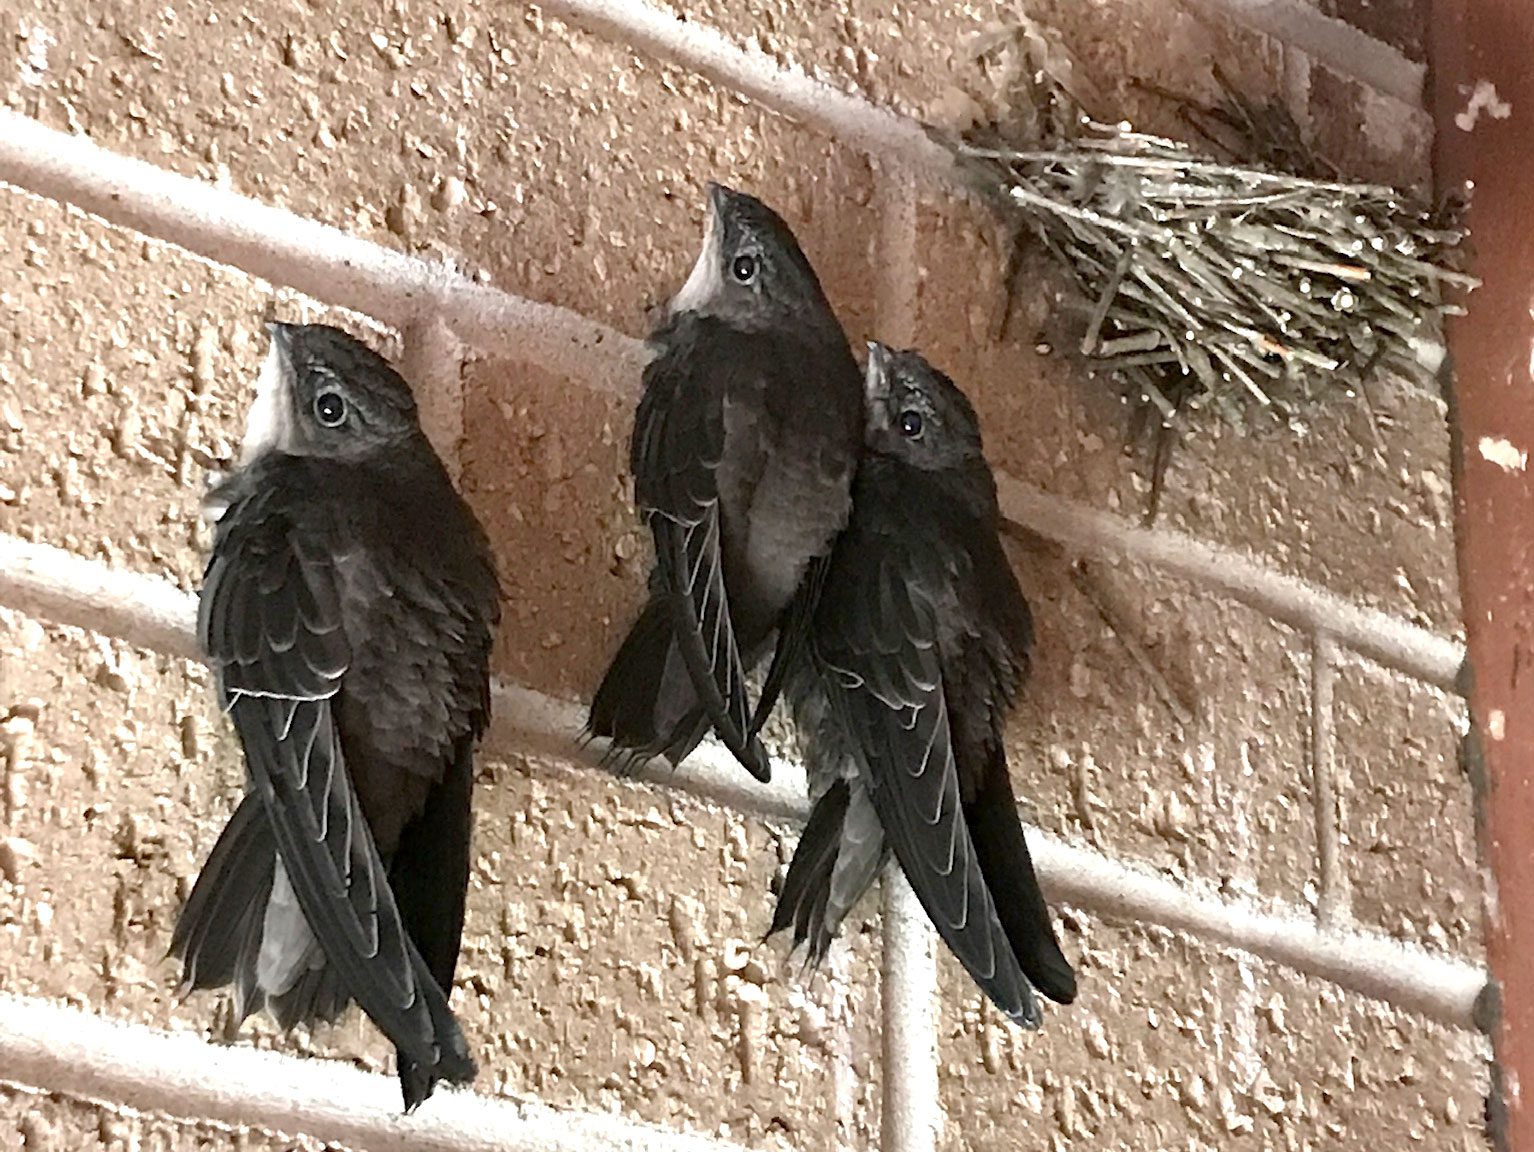 Three brown fledglings with very long wings cling to a brick wall near their nest.